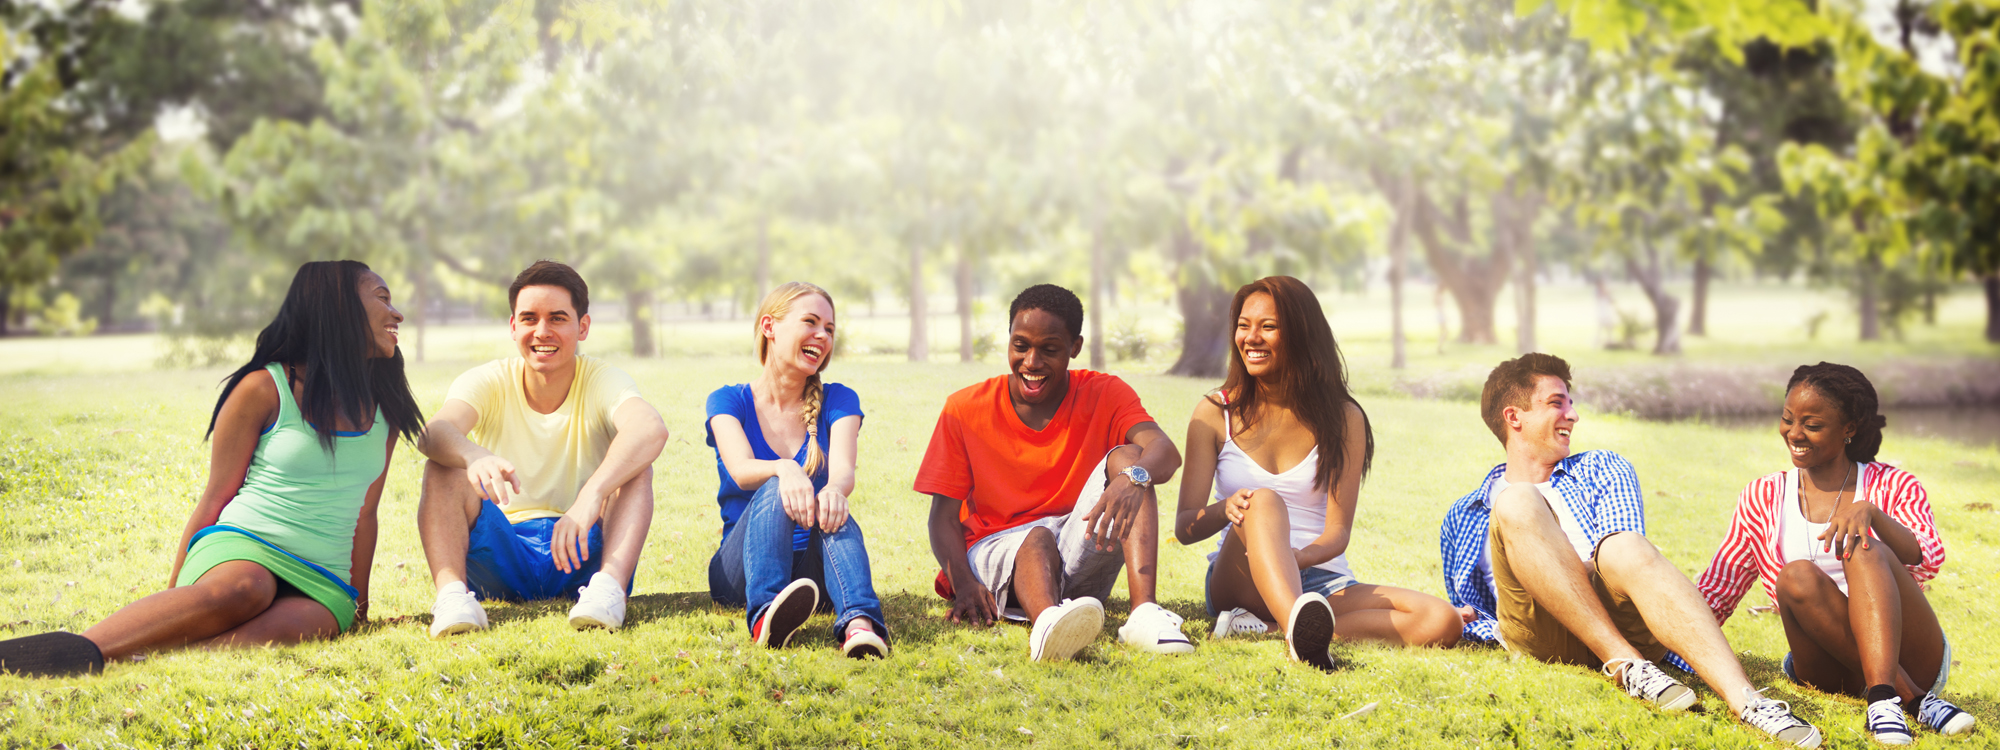 What Teenagers Want - By Pam Lidford